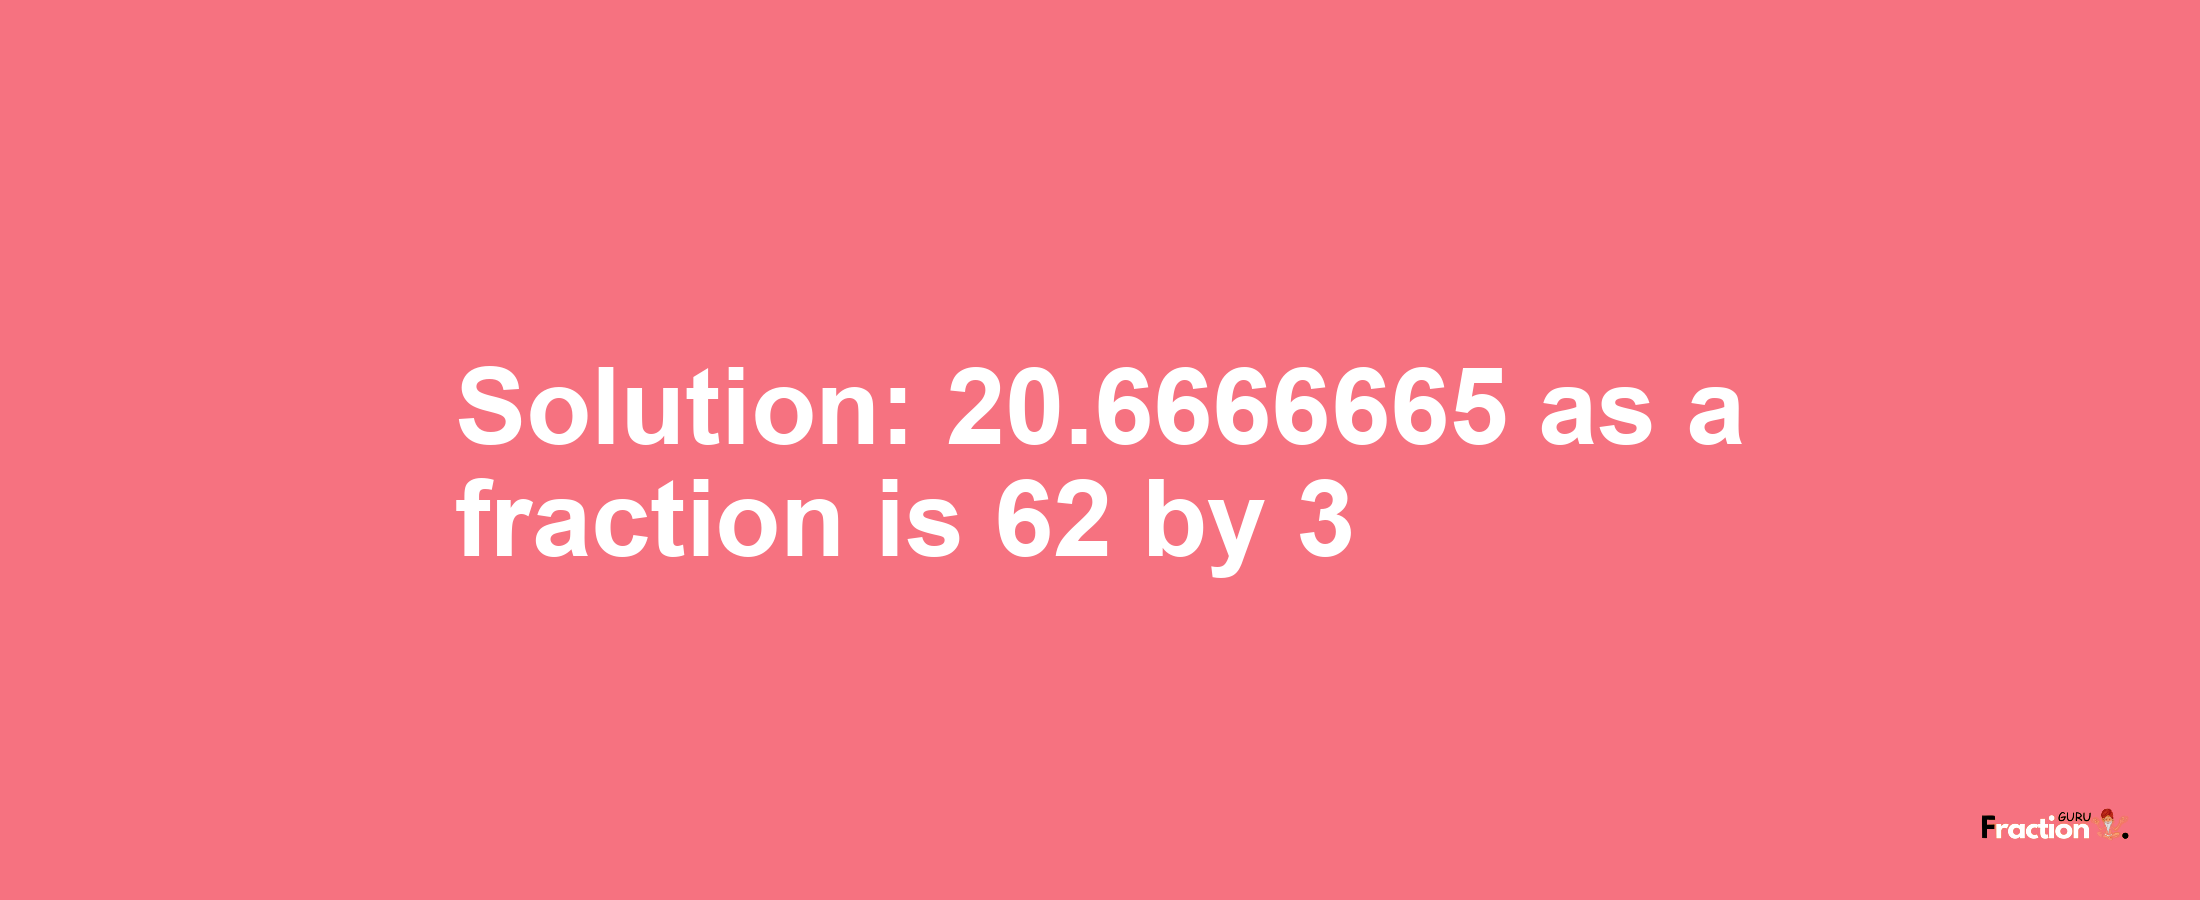 Solution:20.6666665 as a fraction is 62/3